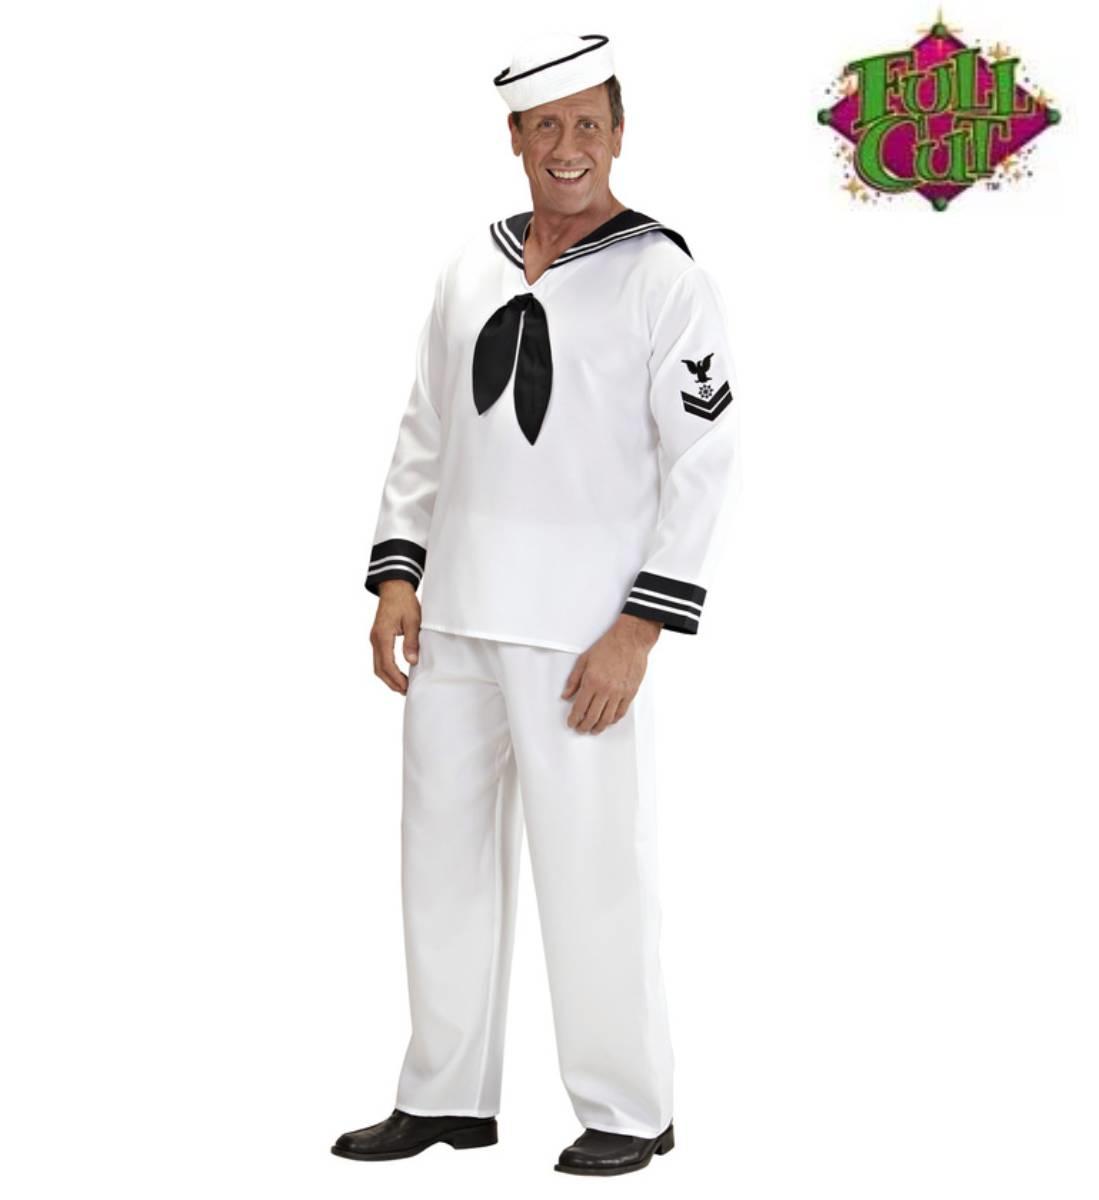 Sailor Fancy Dress Costume in XL by Widmann 5707S available here at Karnival Costumes online party shop